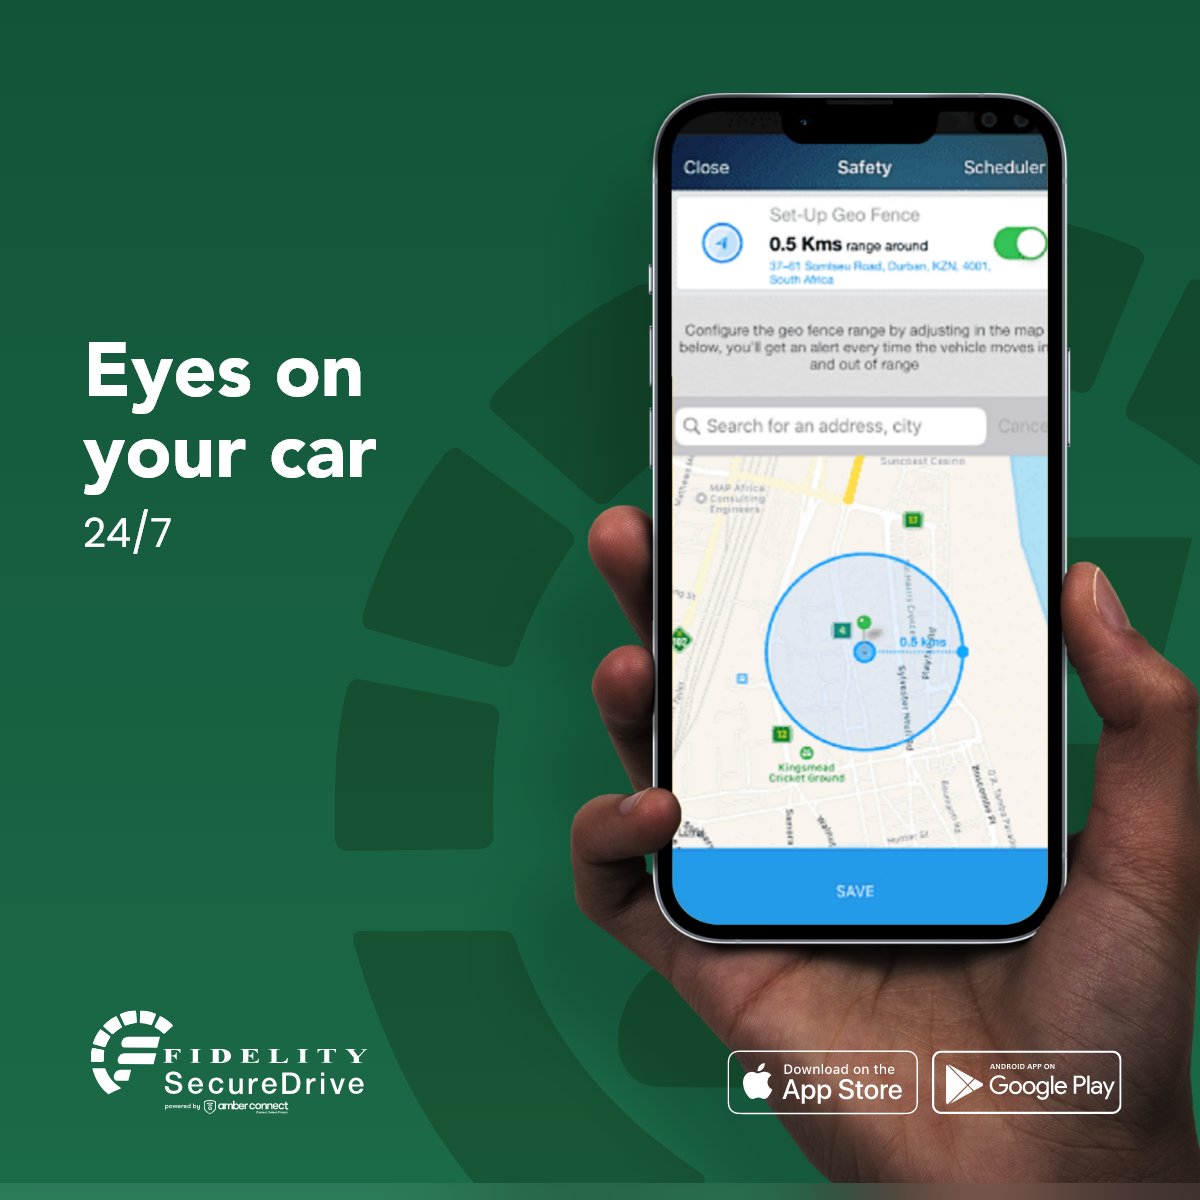 With Fidelity SecureDrive in your pocket, you’ll always know the status of your car, and exactly where it is.

#FidelitySecureDrive #VehicleTracking #YourDrivingCompanion